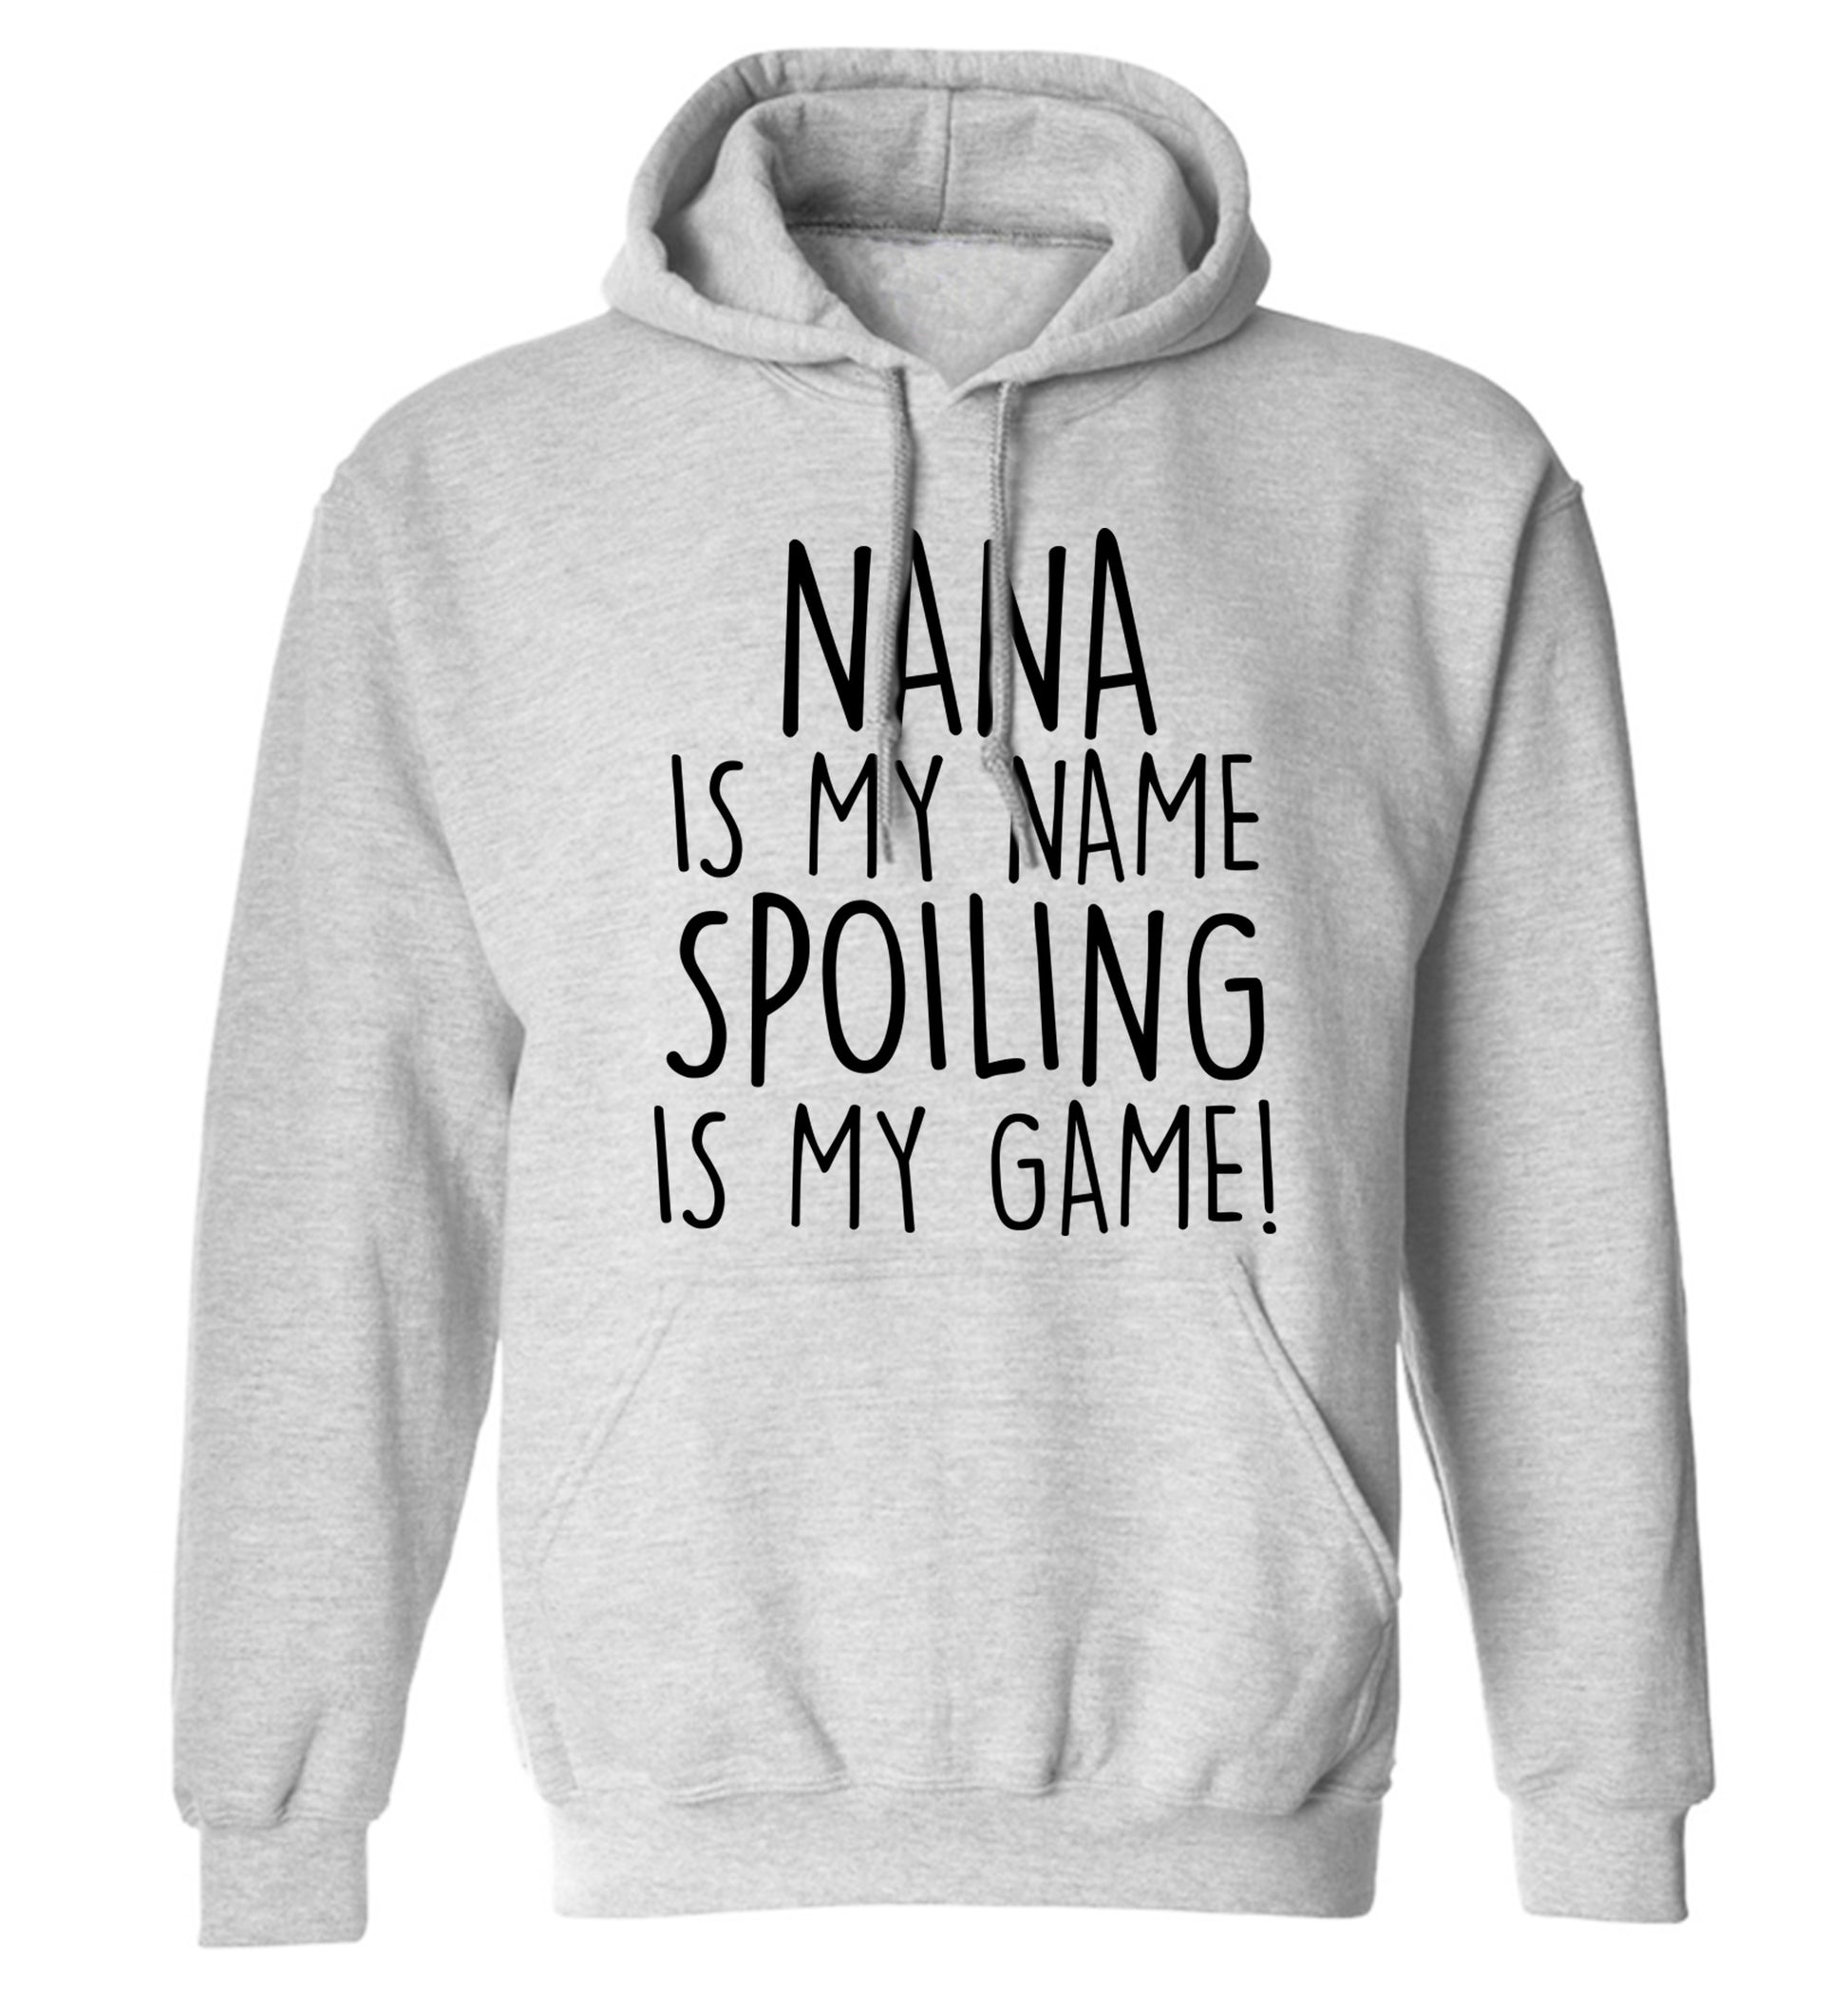 Nana is my name, spoiling is my game adults unisex grey hoodie 2XL